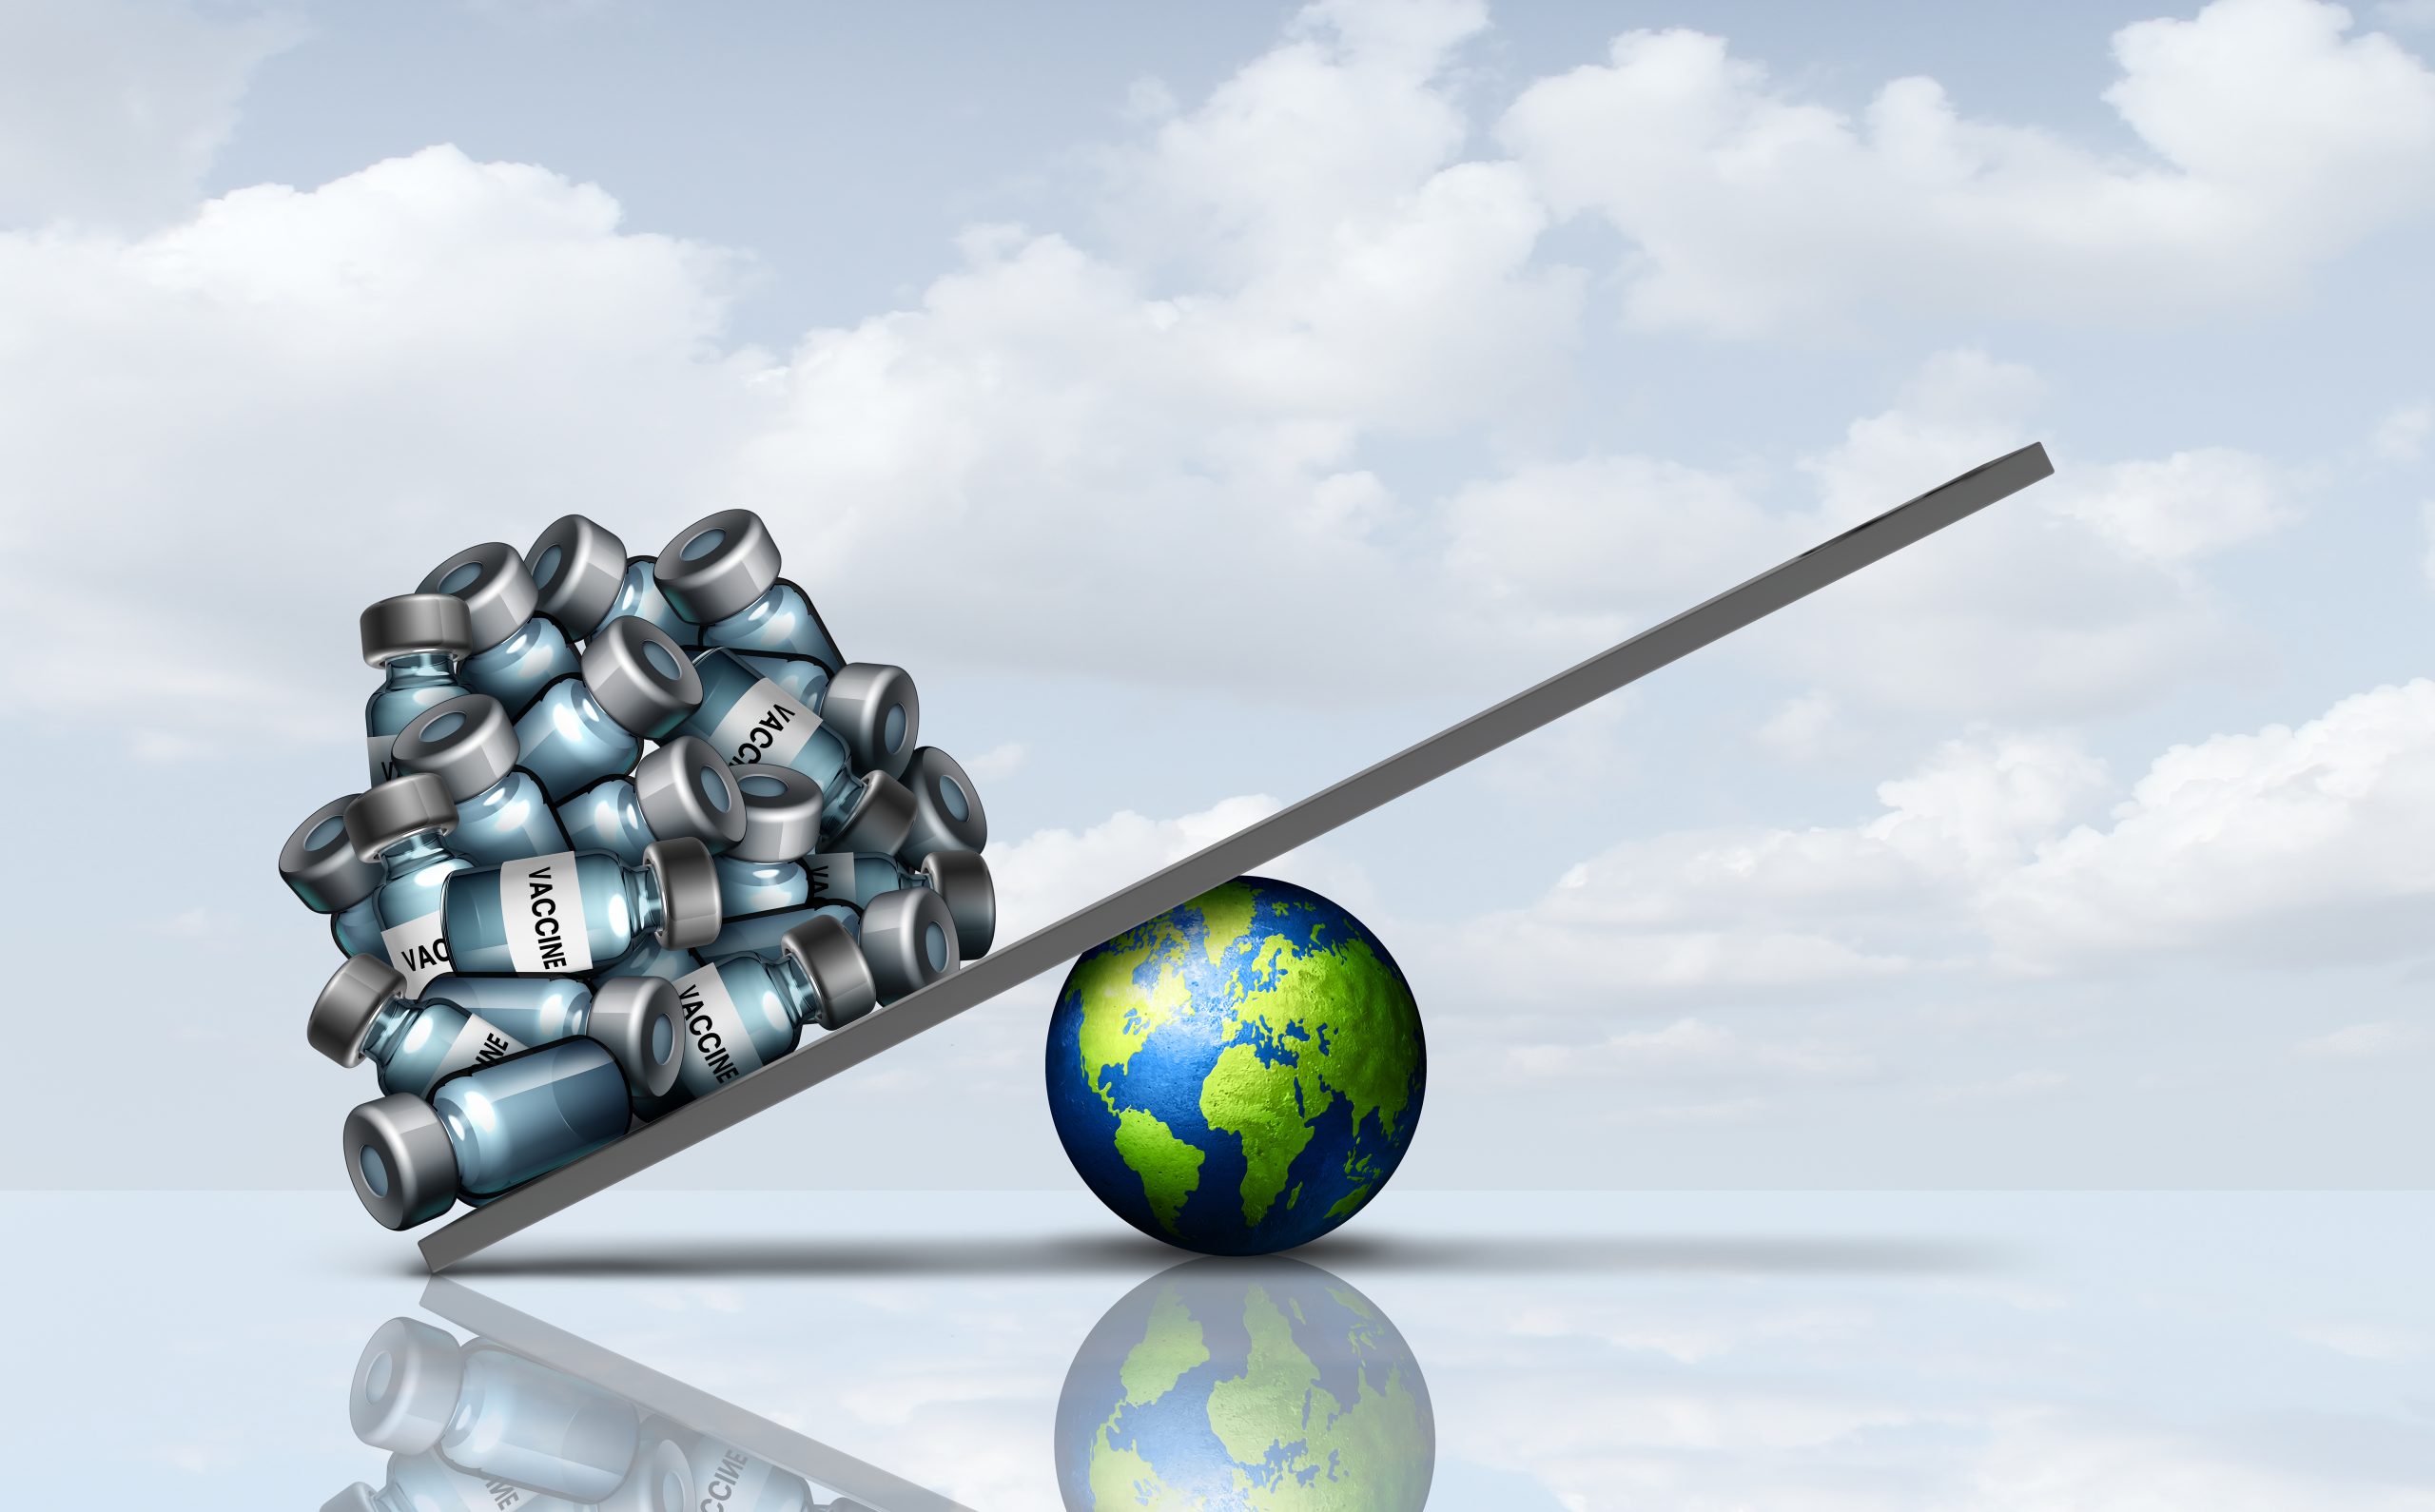 A digital illustration of the Earth, with a scale balancing on top of it. On the left-hand side of the scale, a pile of blue and grey vaccine vials weighs down the scale, with nothing on the other end, representing vaccine inequity and the unequal balance of vaccine distribution. At the bottom of the image is a reflection of the illustration, and in the background is an image of a light blue sky with white clouds.